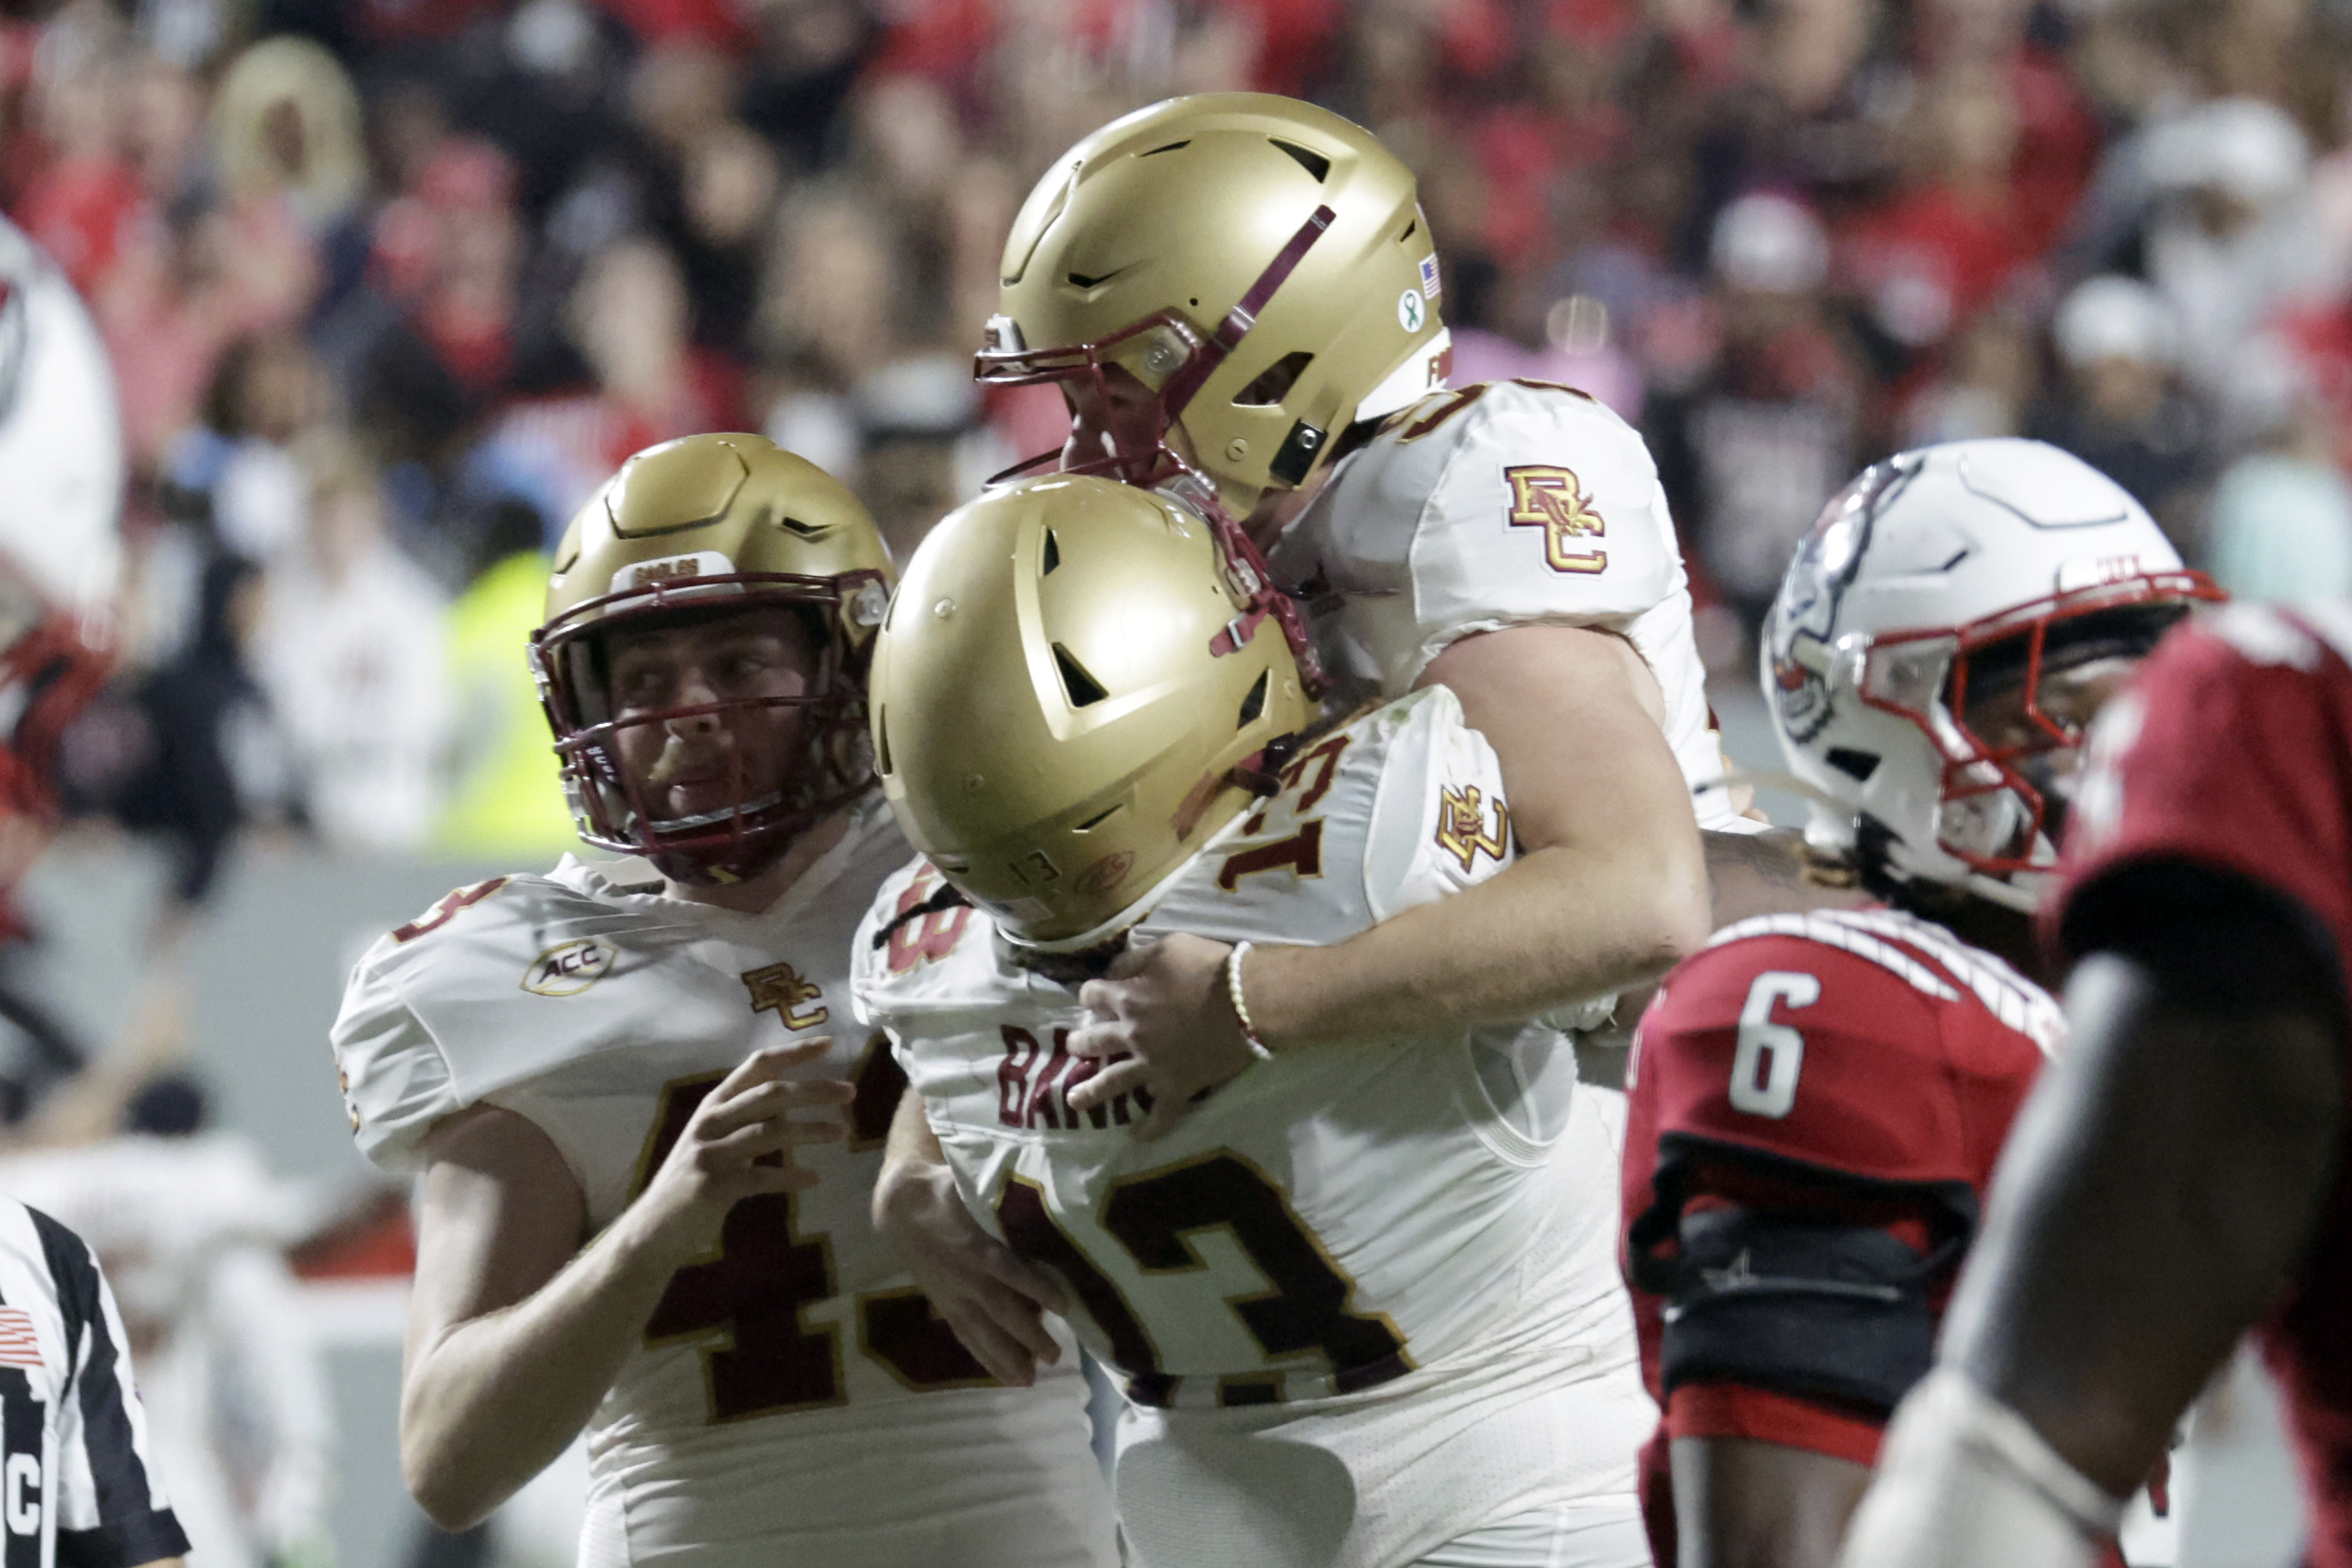 BC Starts Weekend With Win Over NC State - Boston College Athletics